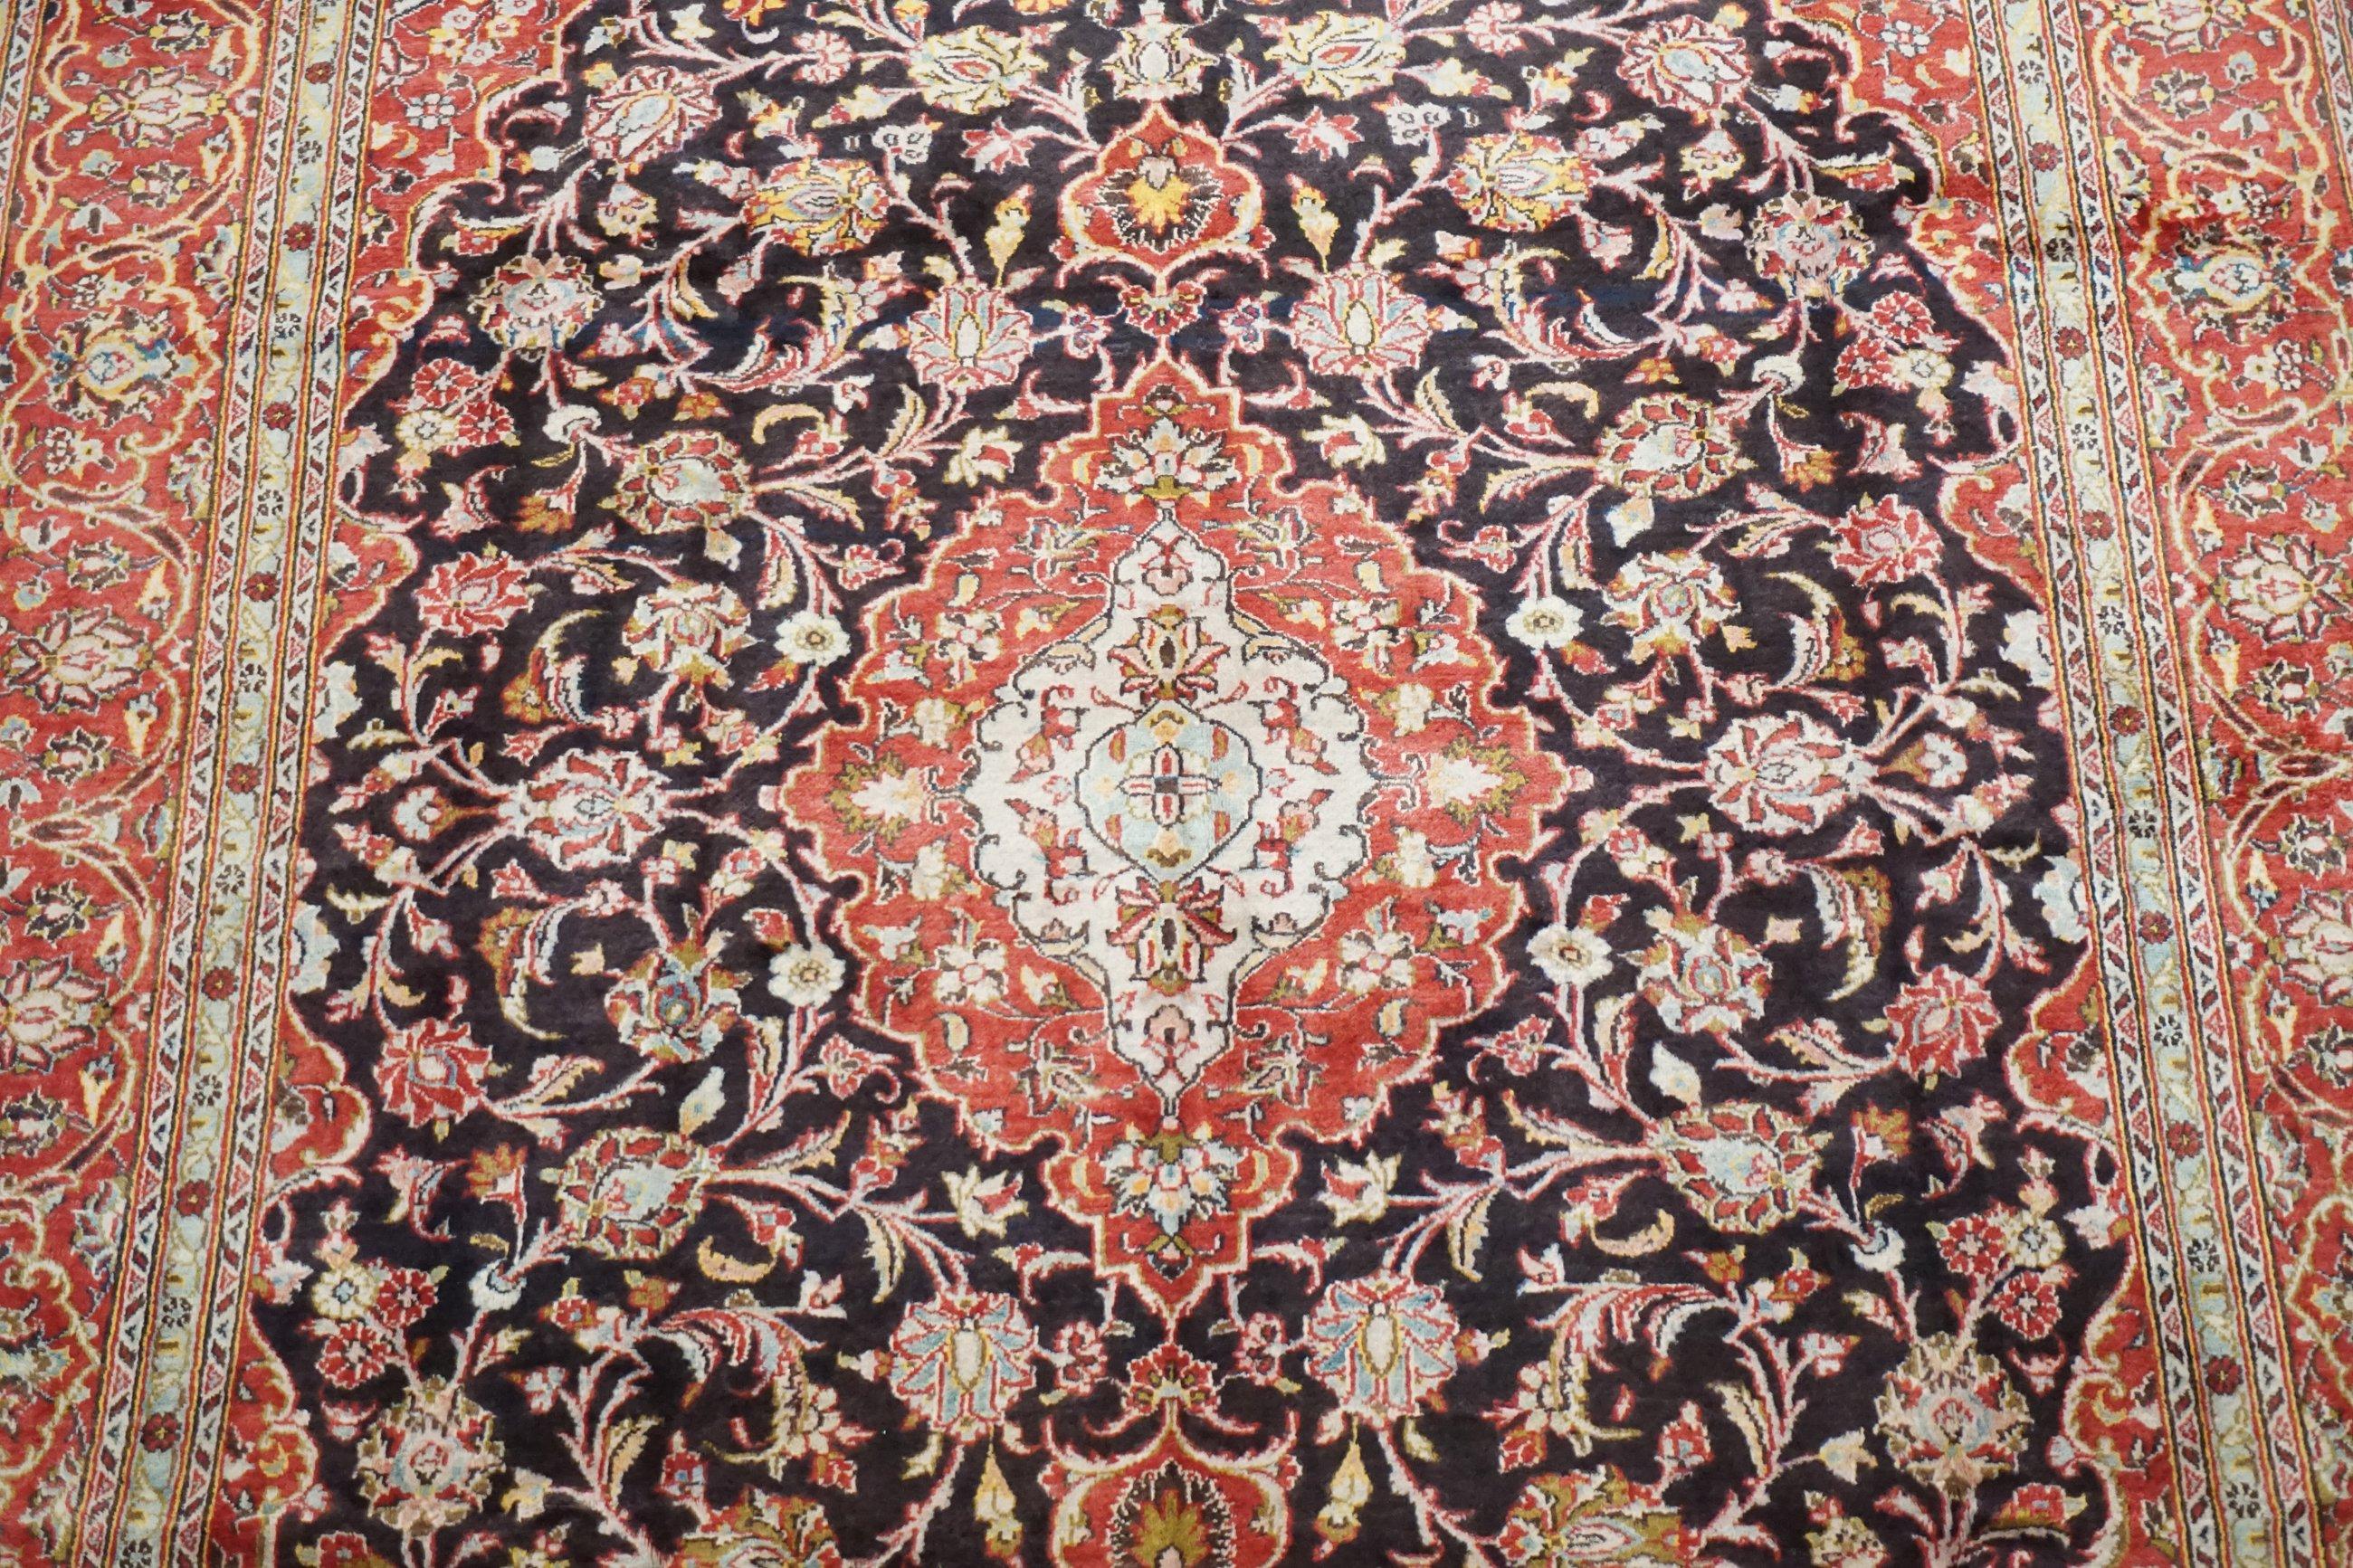 Antique Persian Kashan Rug, circa 1940 In Excellent Condition For Sale In Laguna Hills, CA